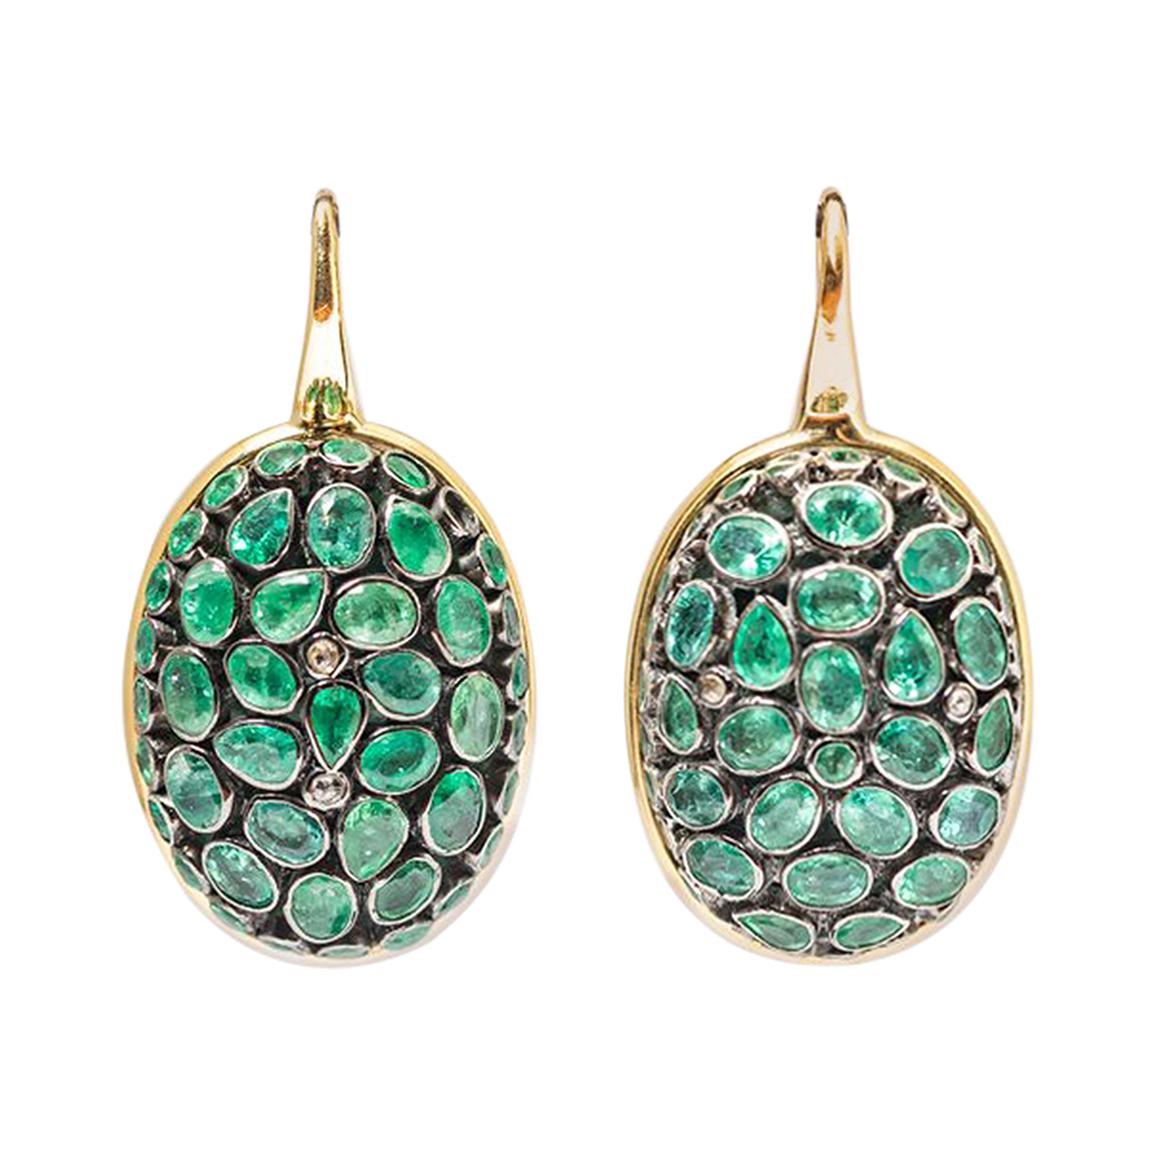 Earring of Turtle Scales, Emeralds Closed, Mounted on Silver and Gold 18 Karat